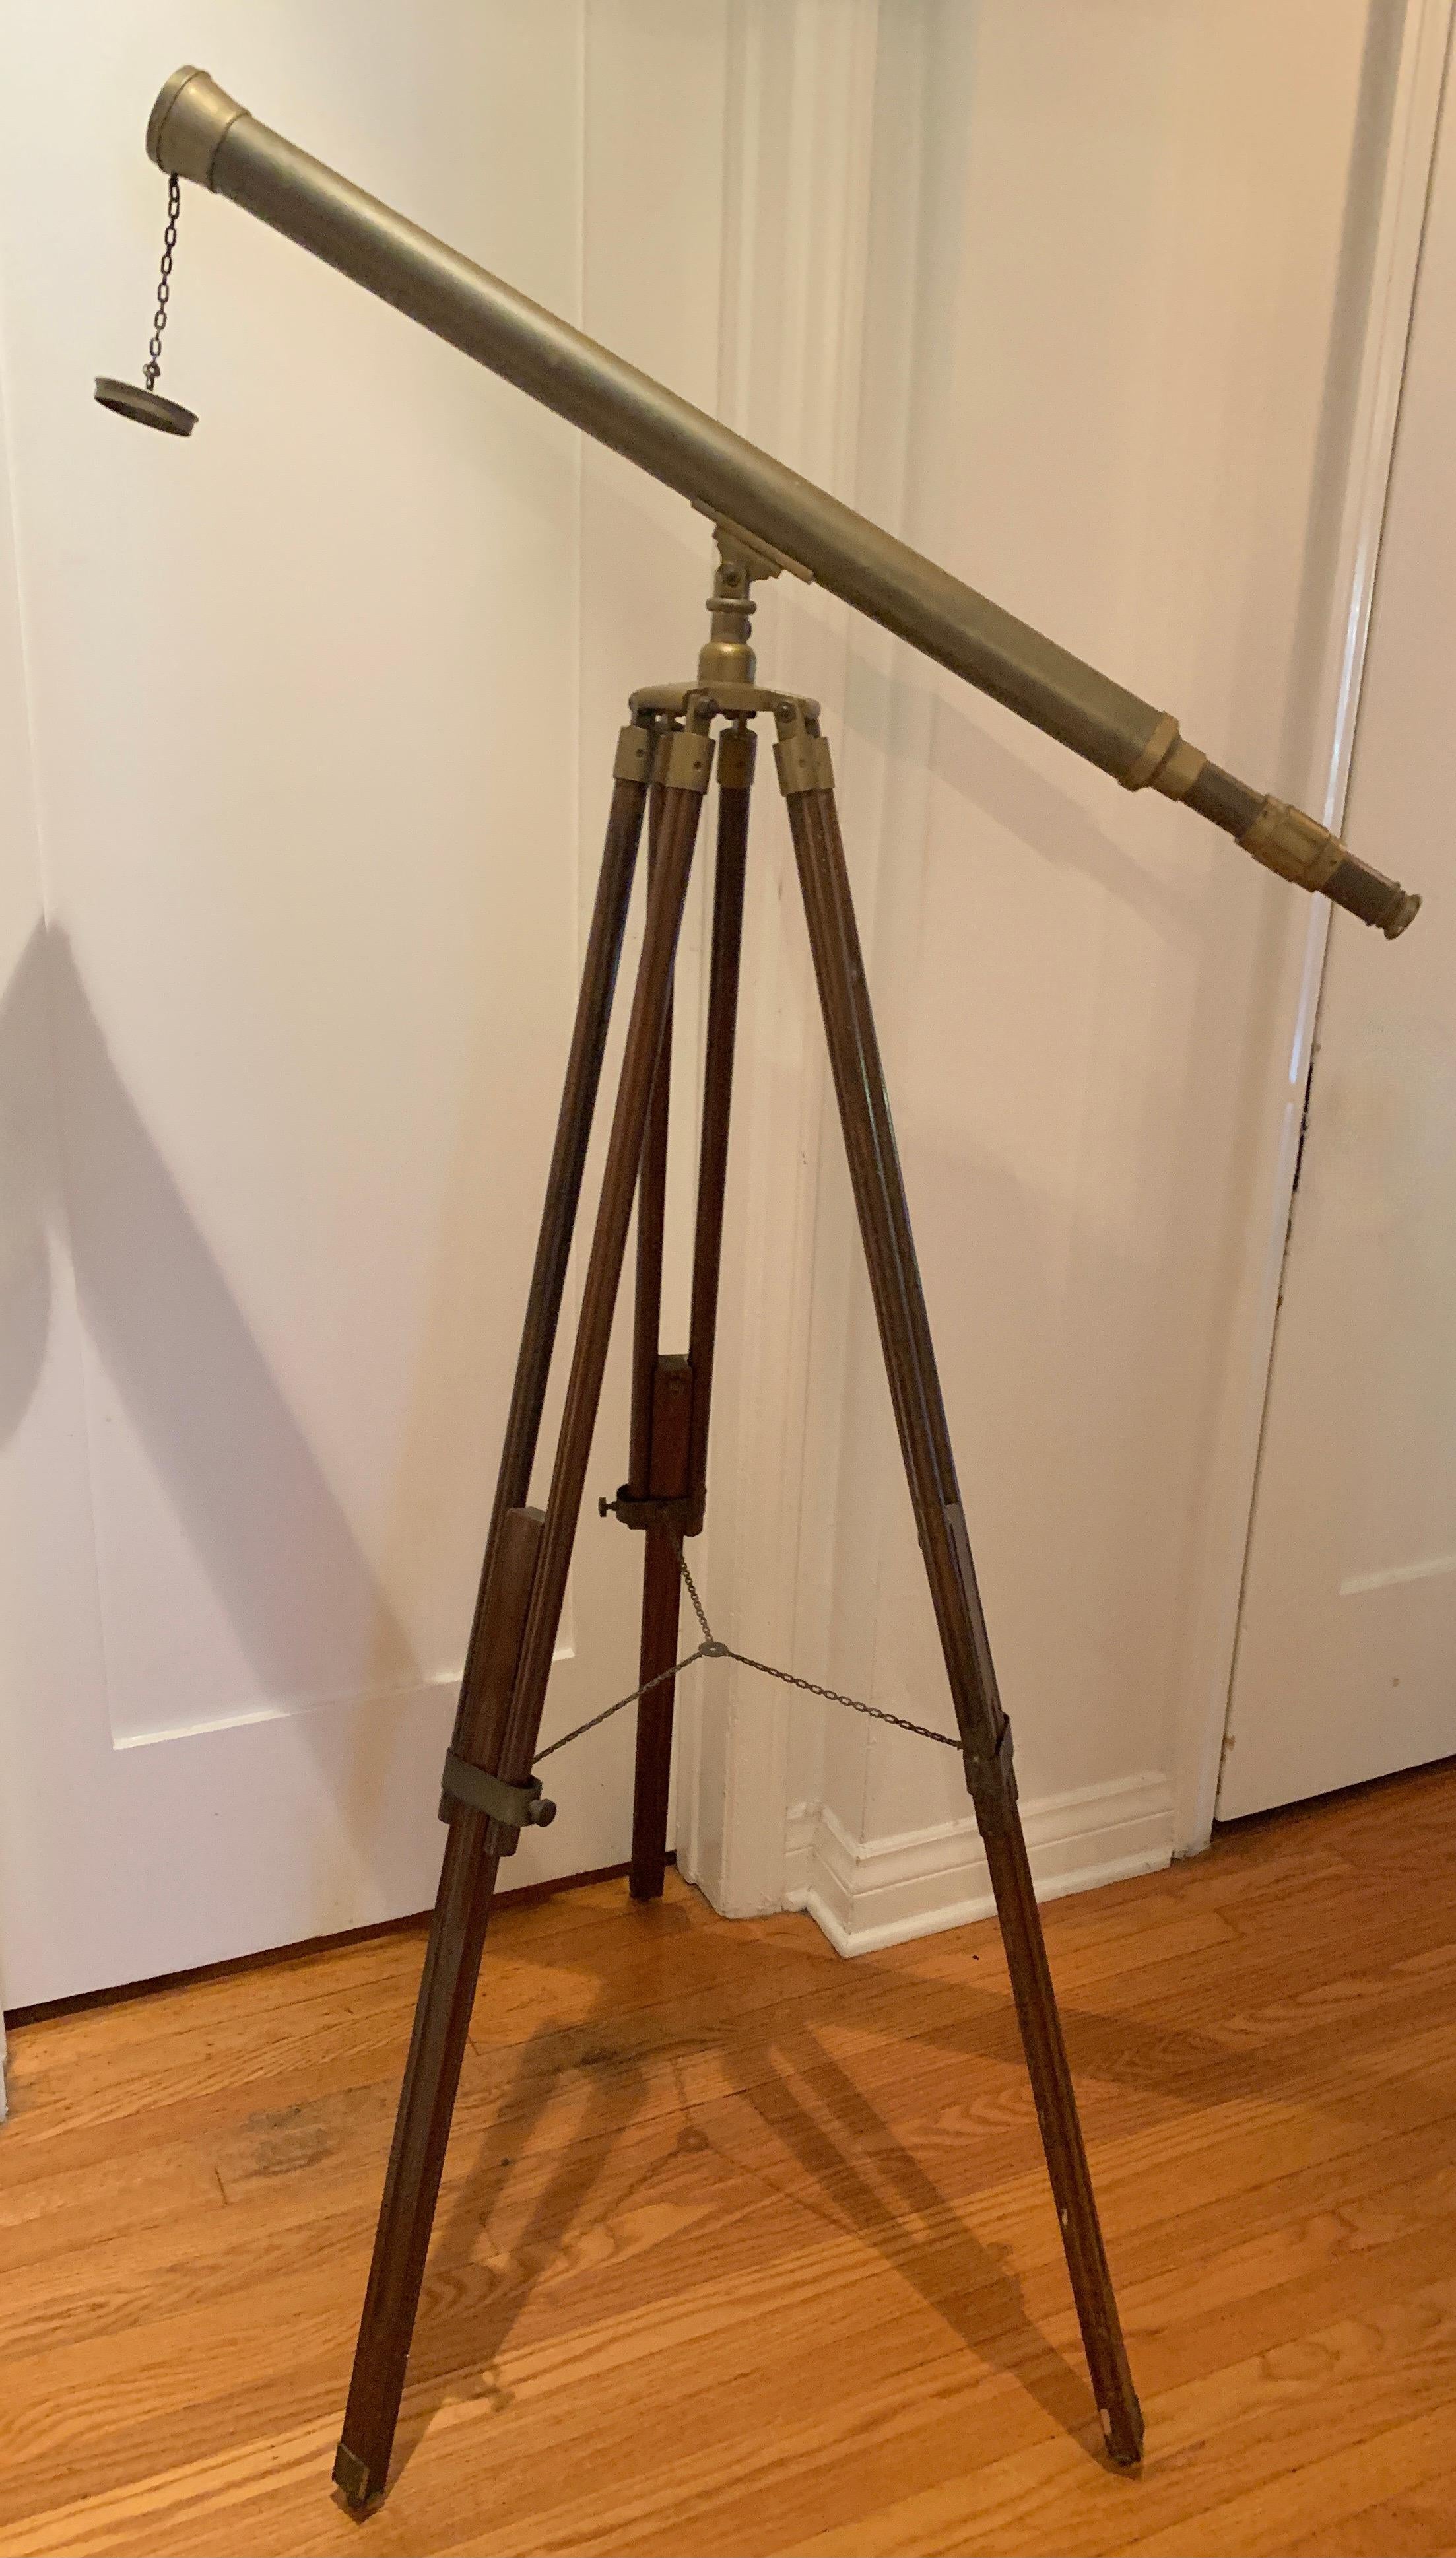 Telescopes are a terrific decorative addition to any den, library or study. A compliment to any Ralph Lauren, rustic or studious environment, ours has all wooden adjustable legs with Solid Patinated brass fittings and hardware. The piece is for